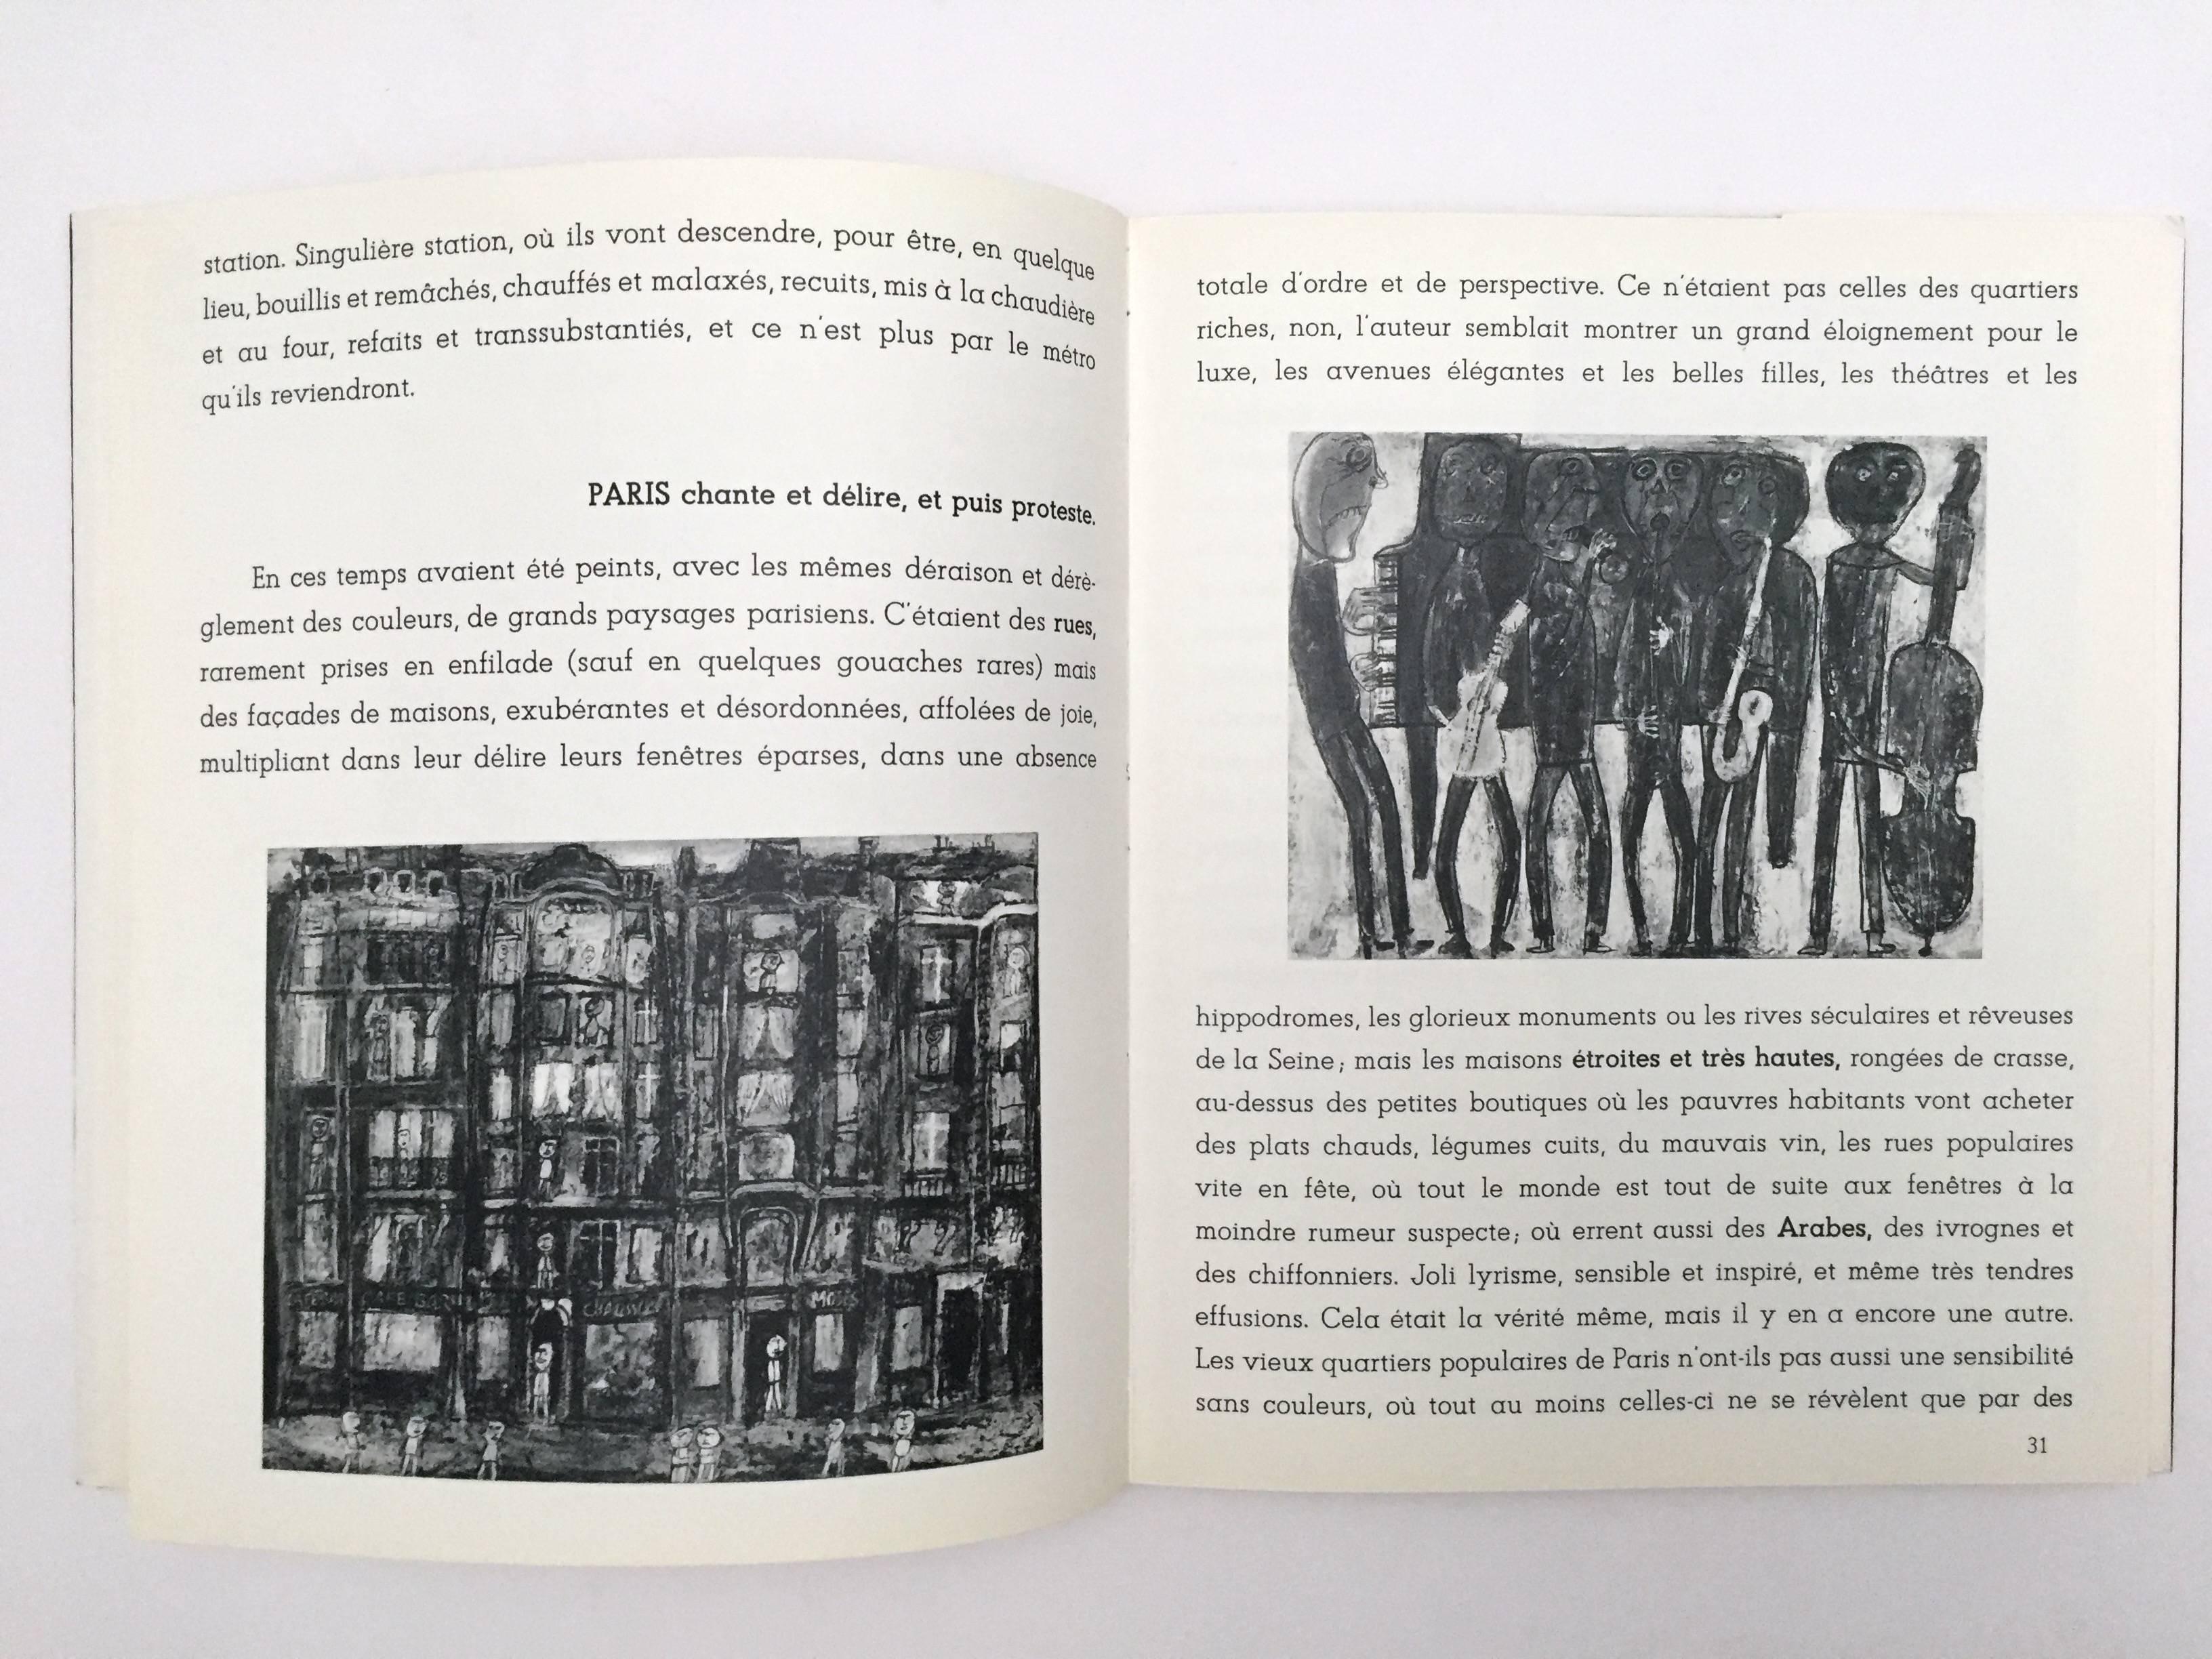 First edition, published by Pierre Matisse, New York, 1953.
One of 1000 numbered copies, this being n°

The dustjacket is an original lithograph by Dubuffet. This catalogue, created for an exhibition of the work of Jean Dubuffet at the Pierre